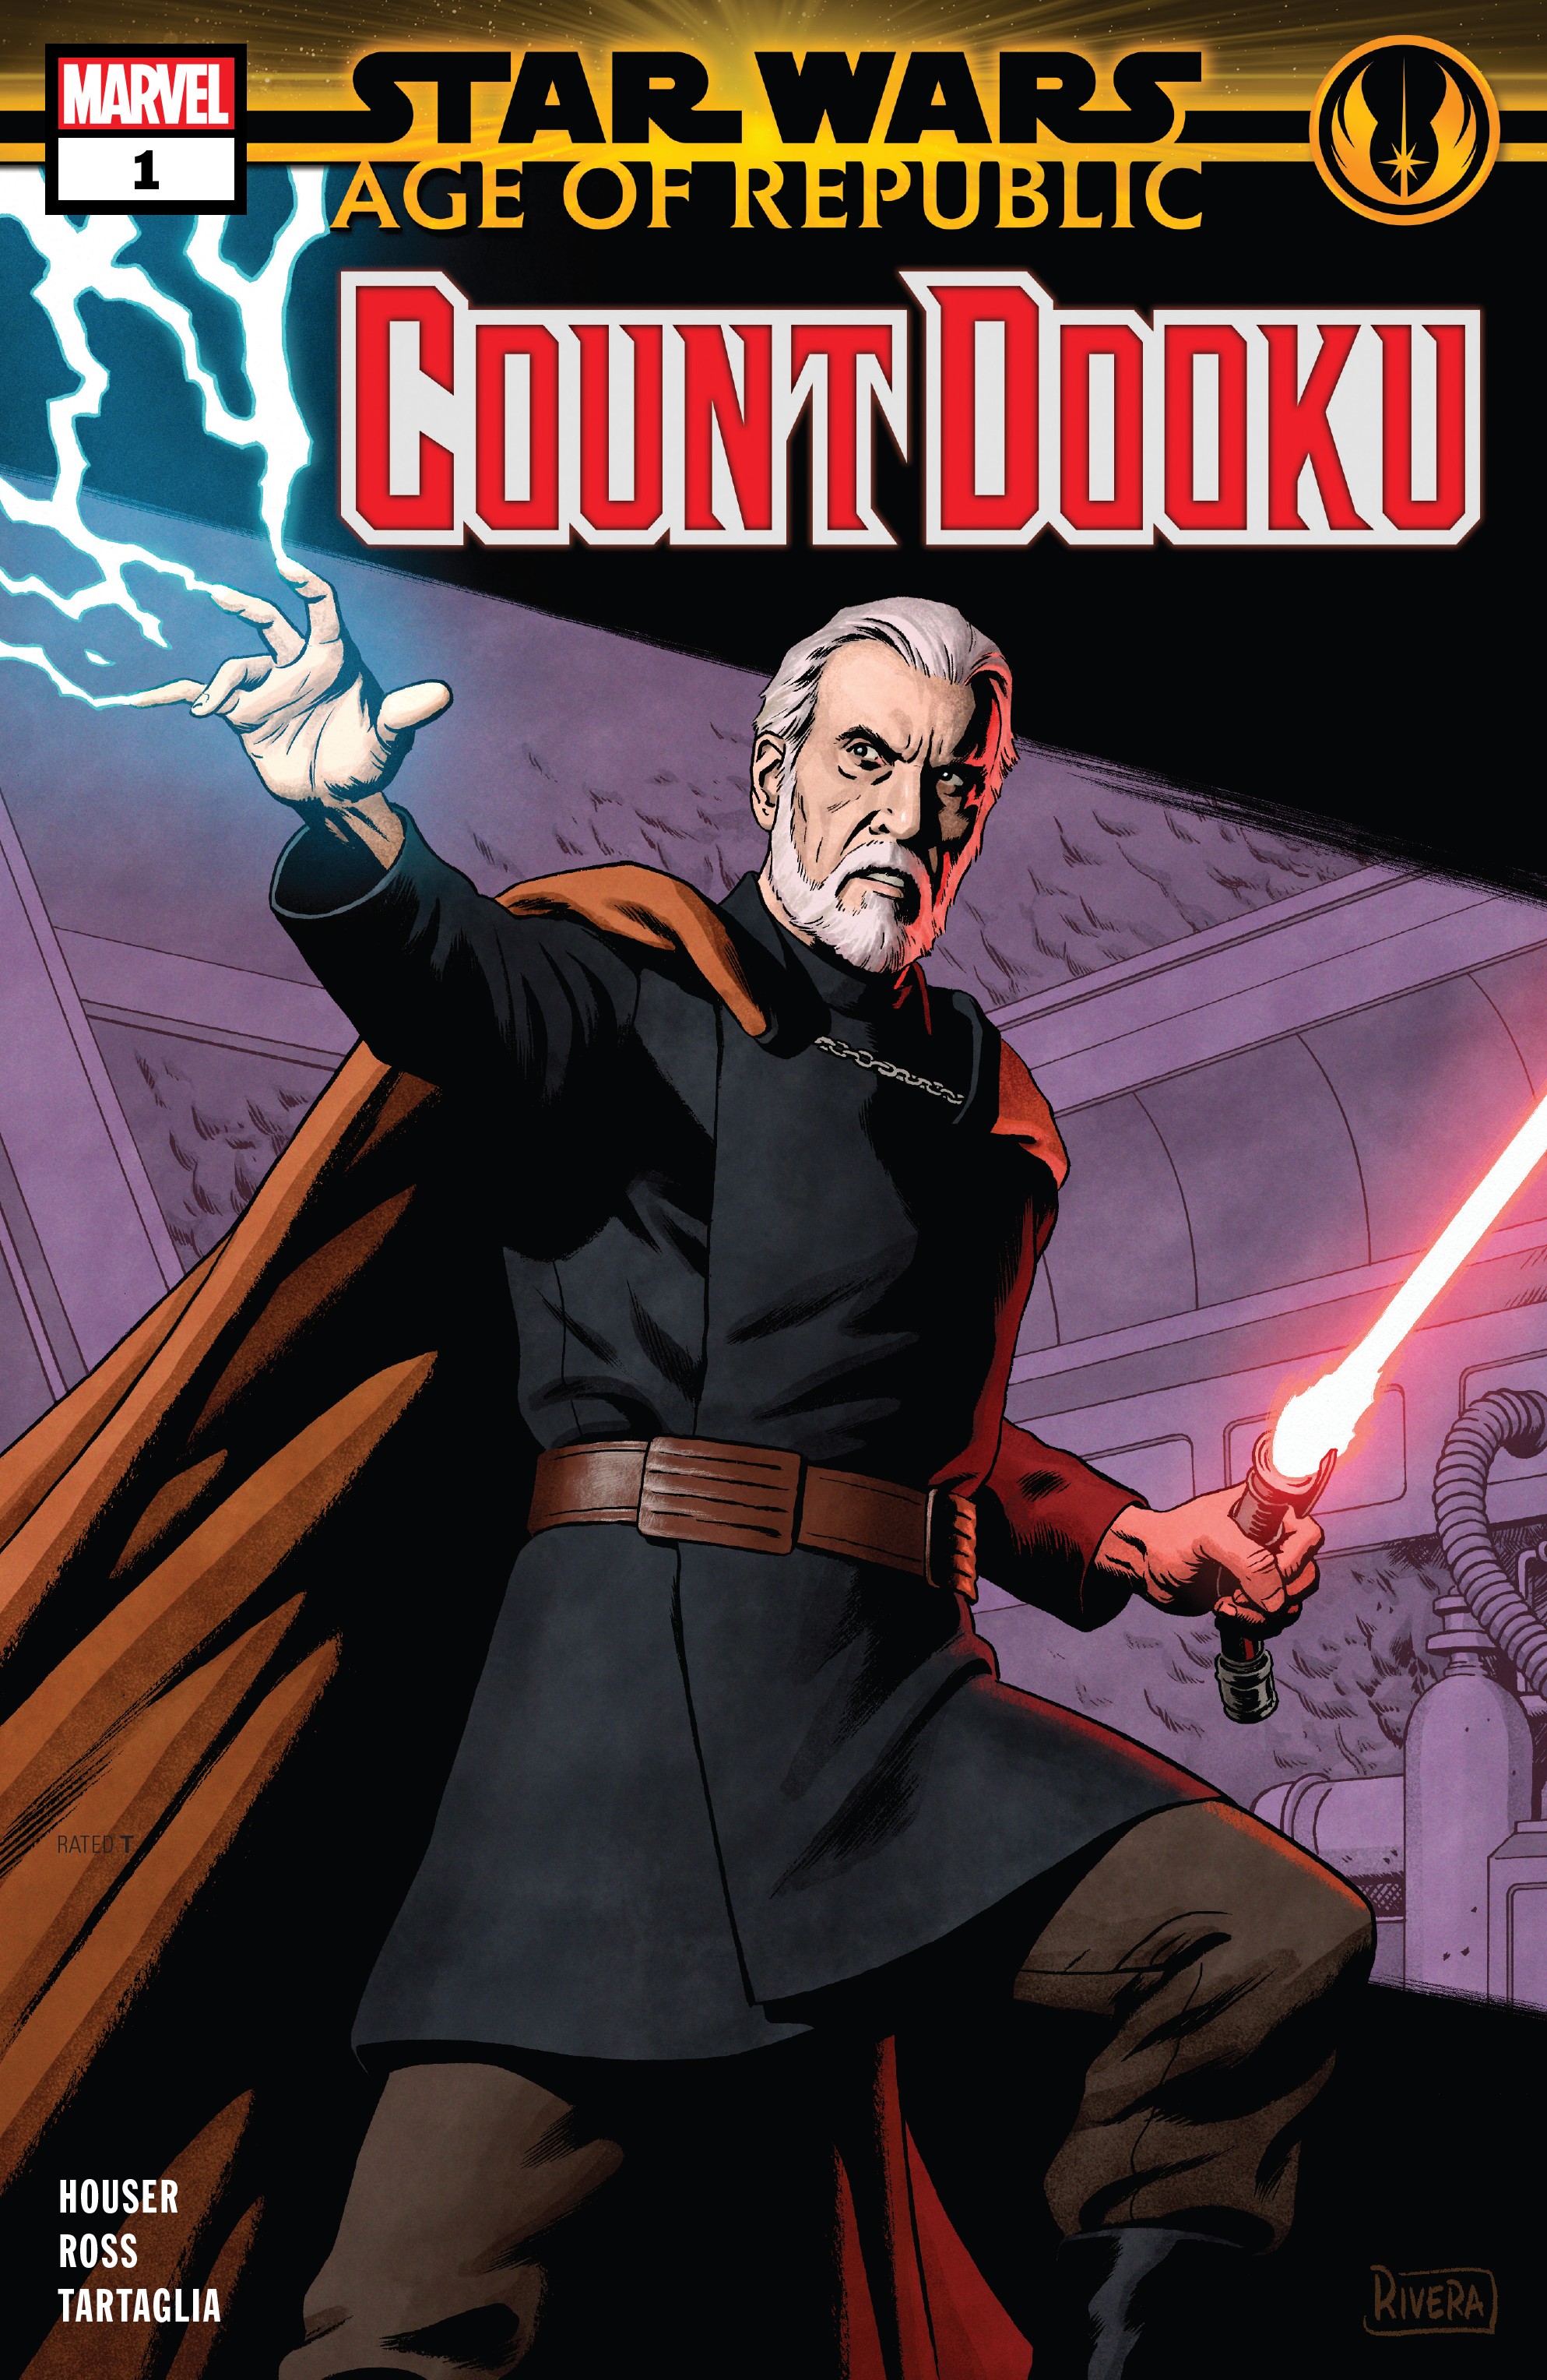 Count Dooku Porn - Star Wars Age Of Republic Count Dooku Full | Read Star Wars Age Of Republic Count  Dooku Full comic online in high quality. Read Full Comic online for free -  Read comics